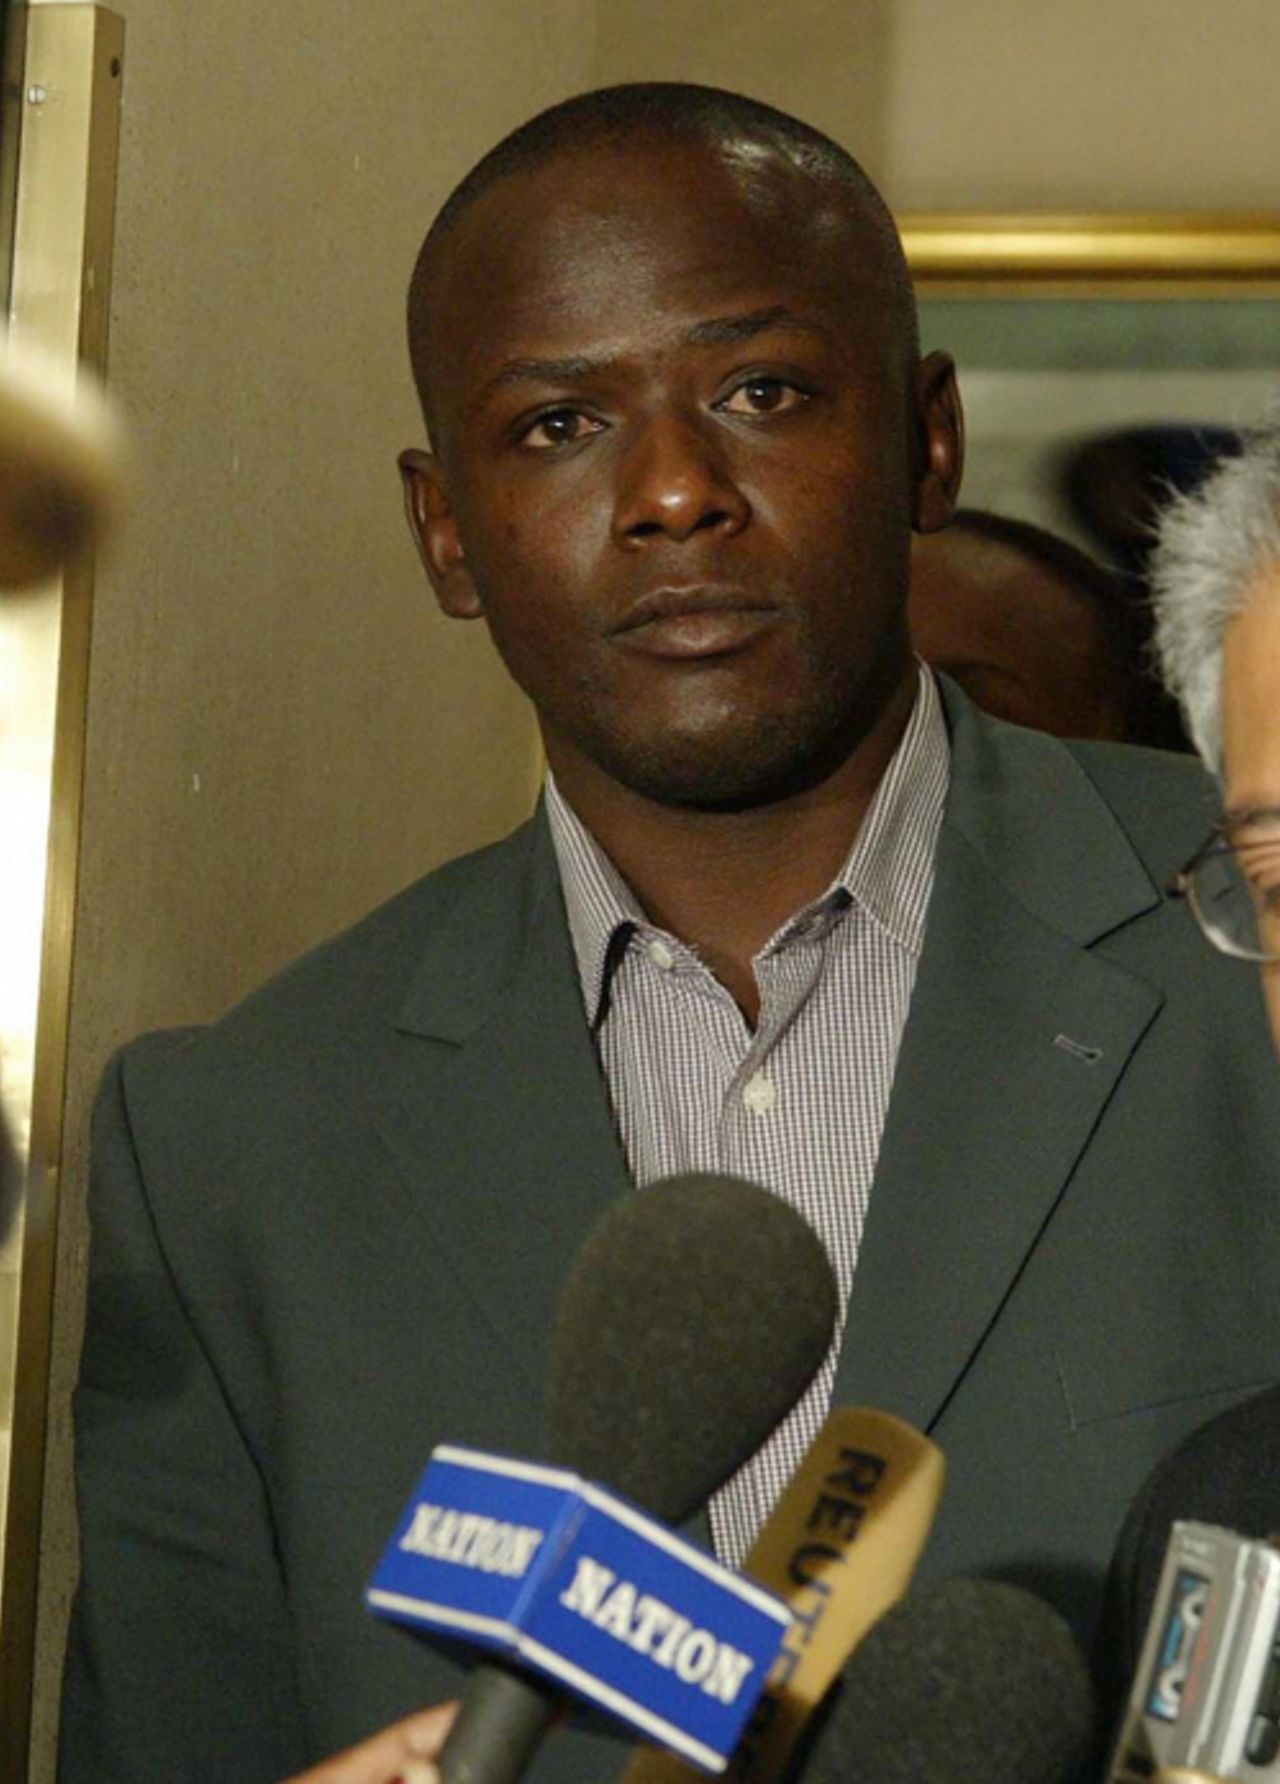 Maurice Odumbe and his lawyer in court, June 19, 2004